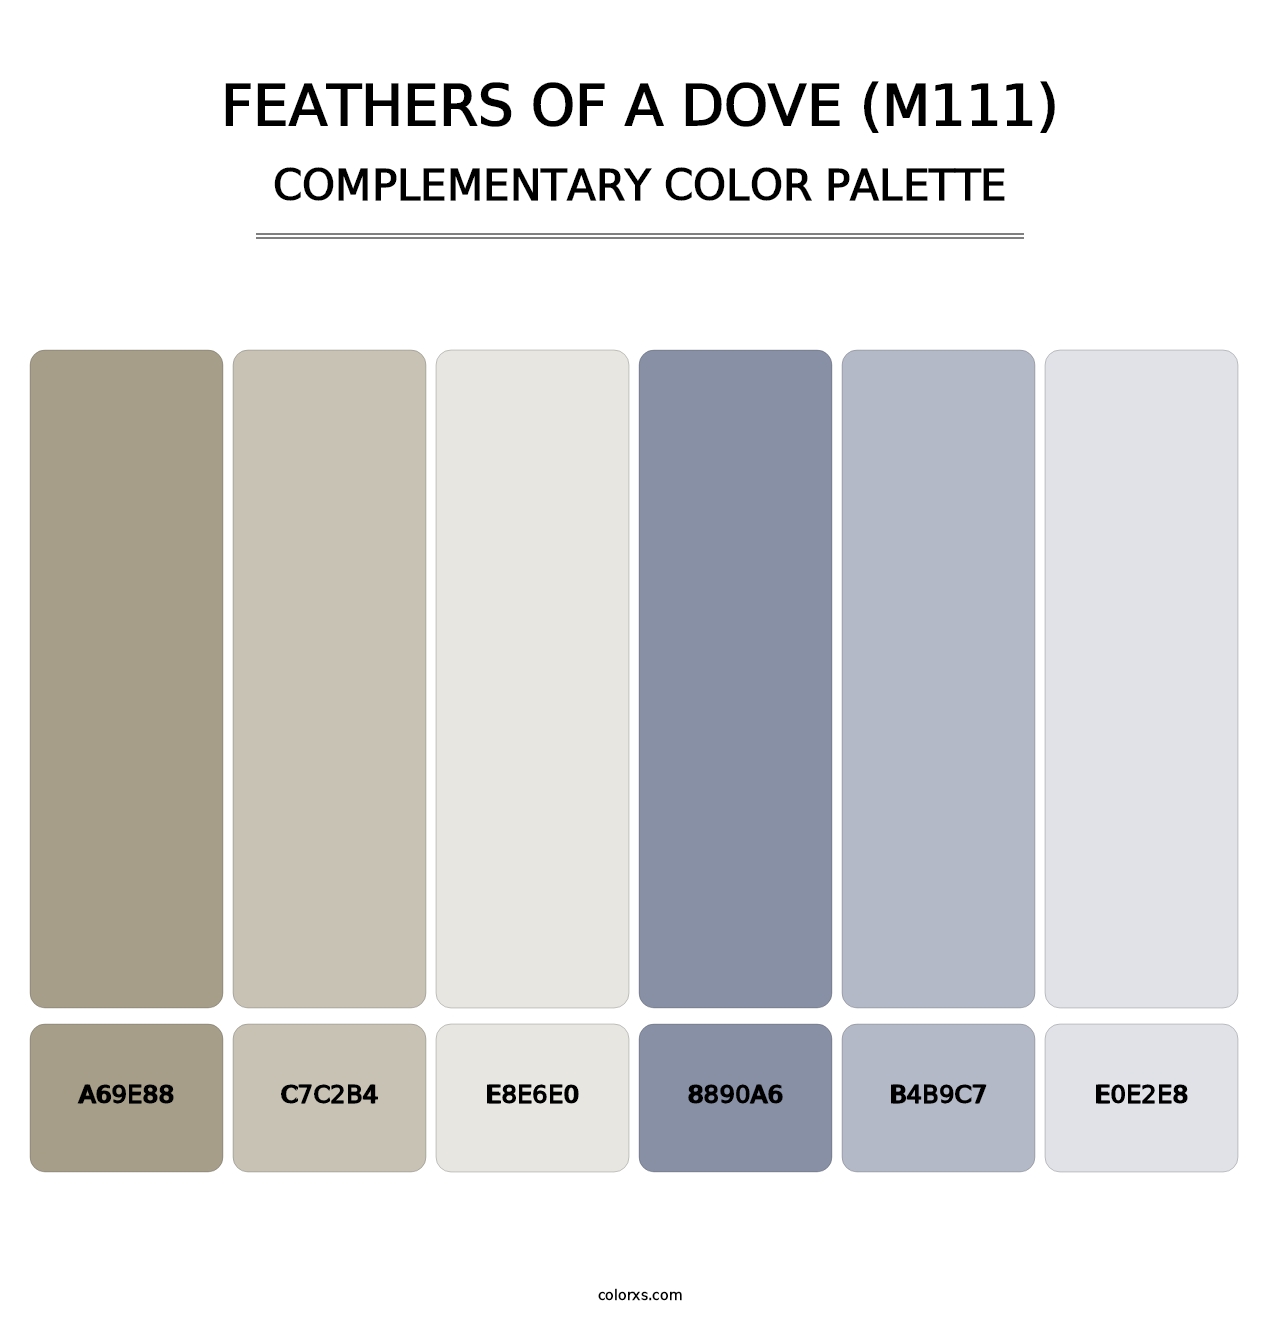 Feathers of a Dove (M111) - Complementary Color Palette